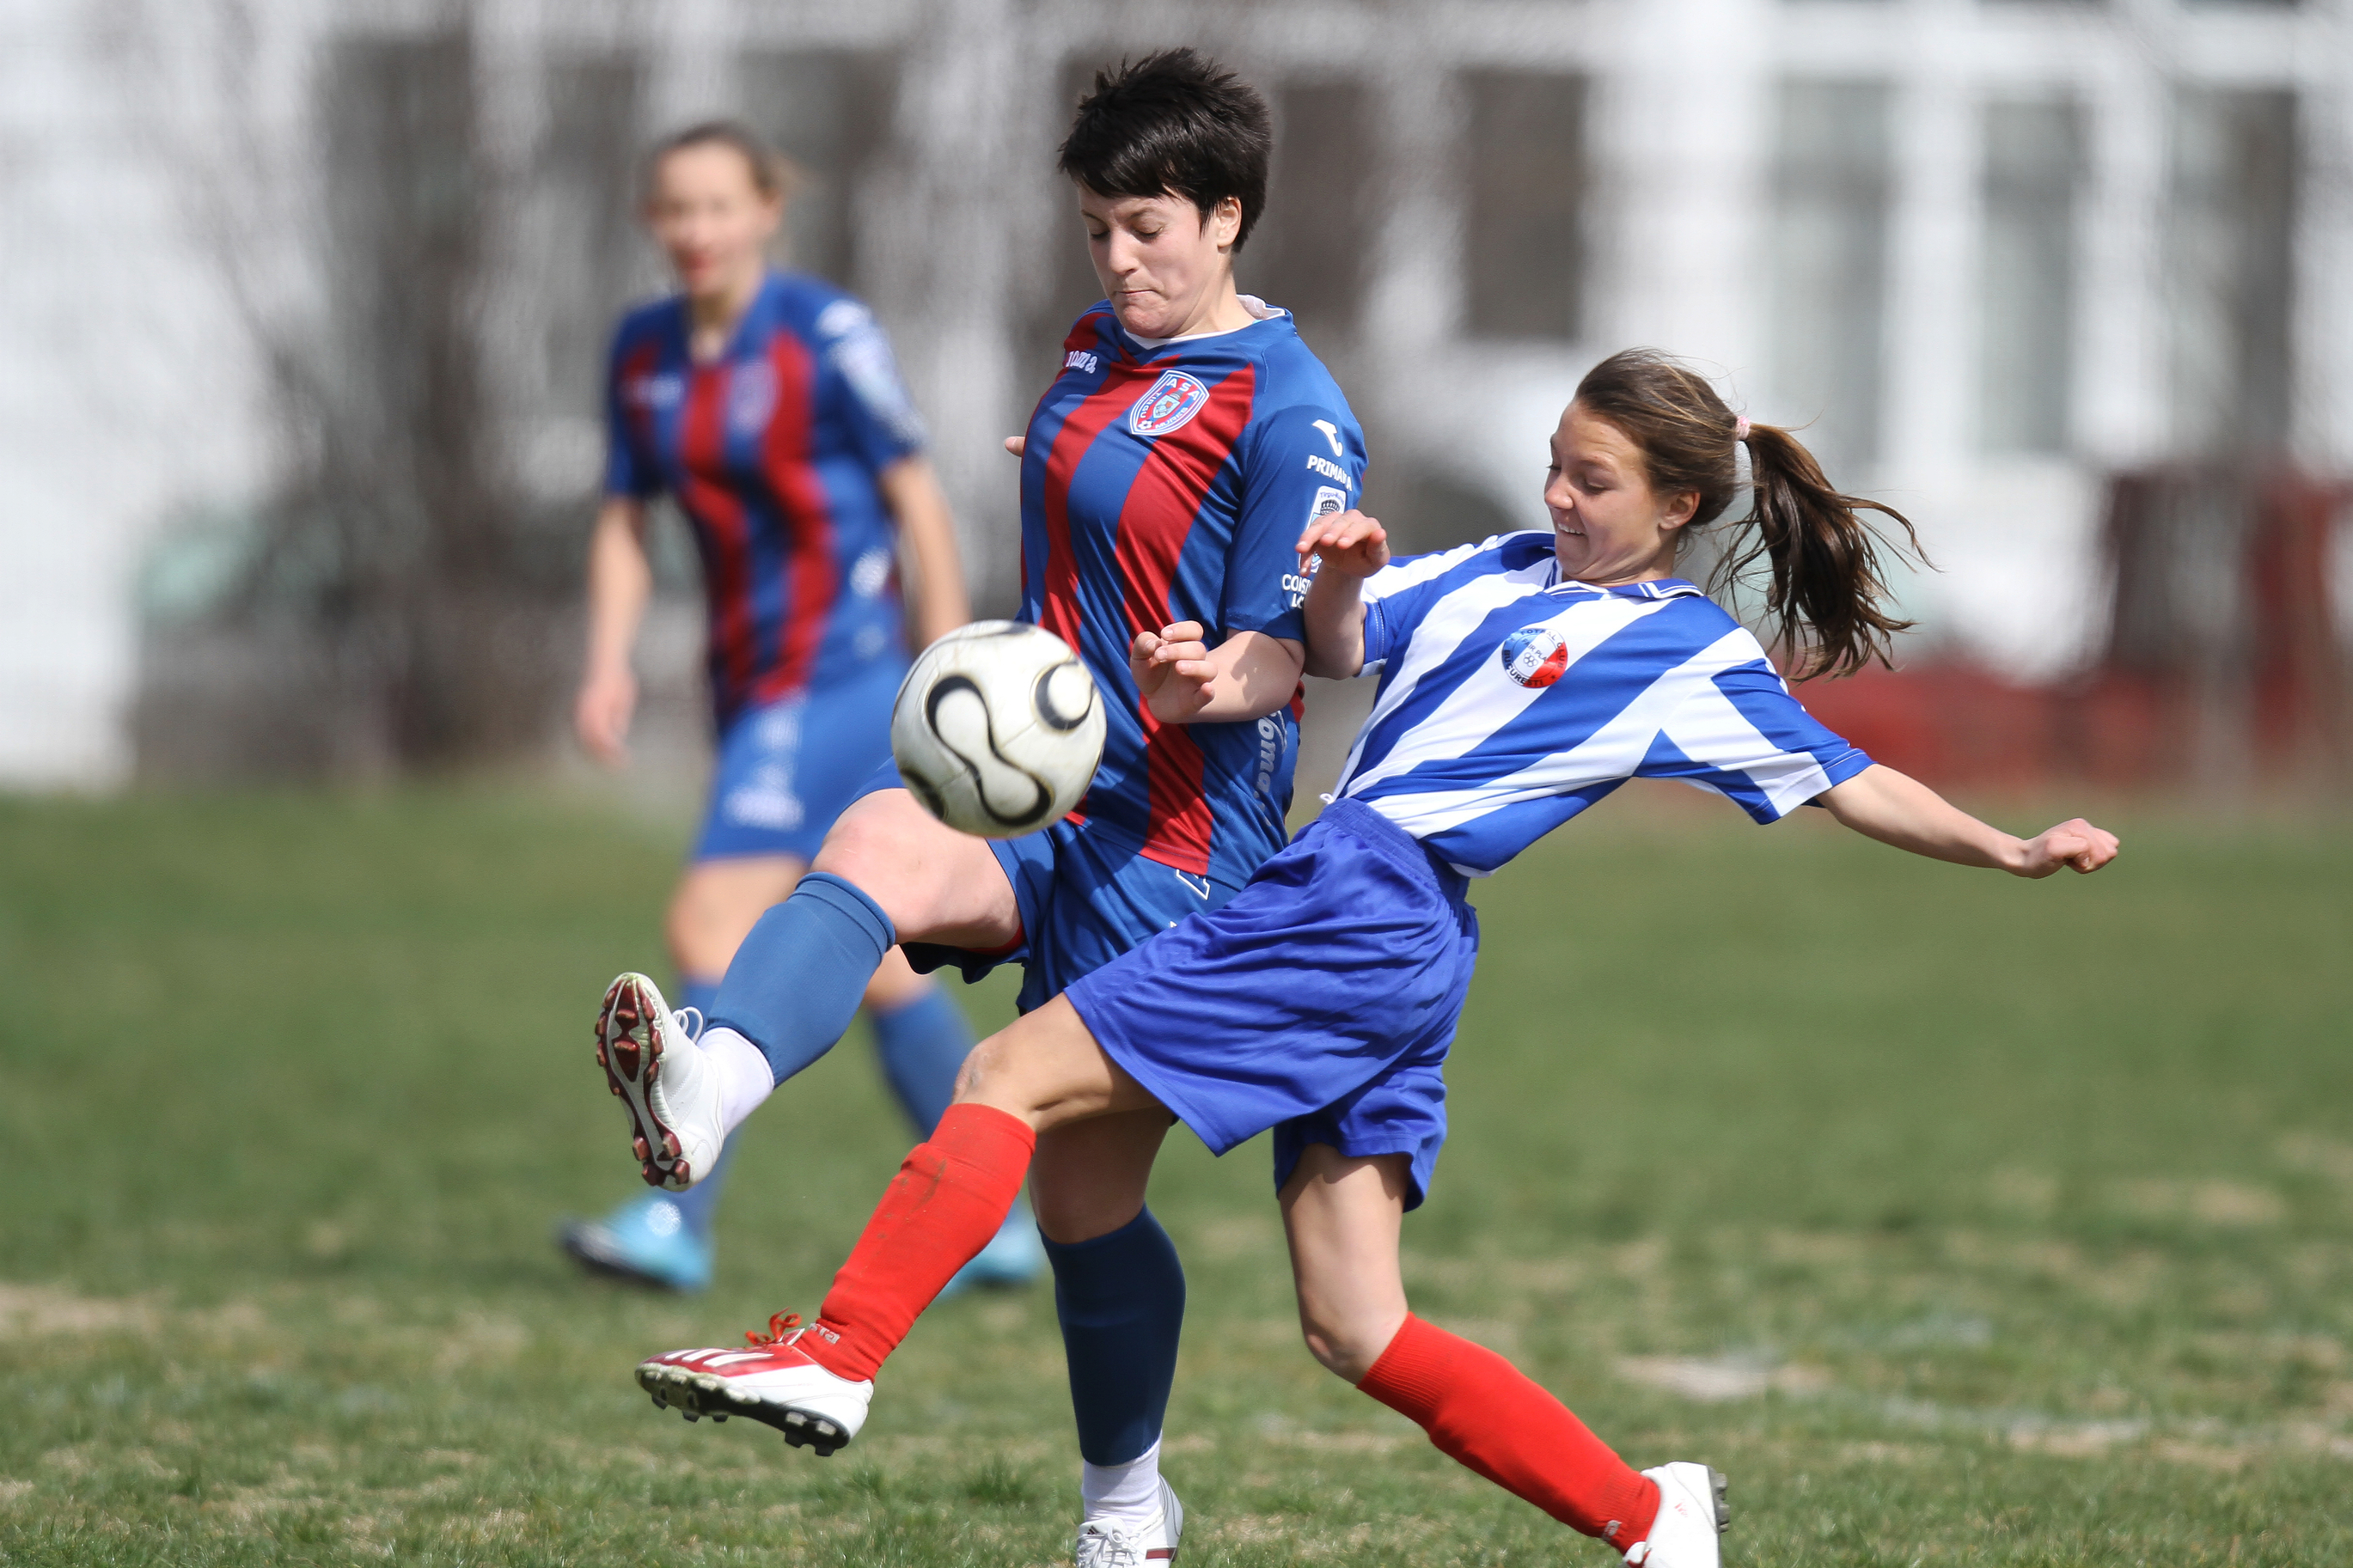 Romanian Football Federation to establish five new football classes for girls in high schools